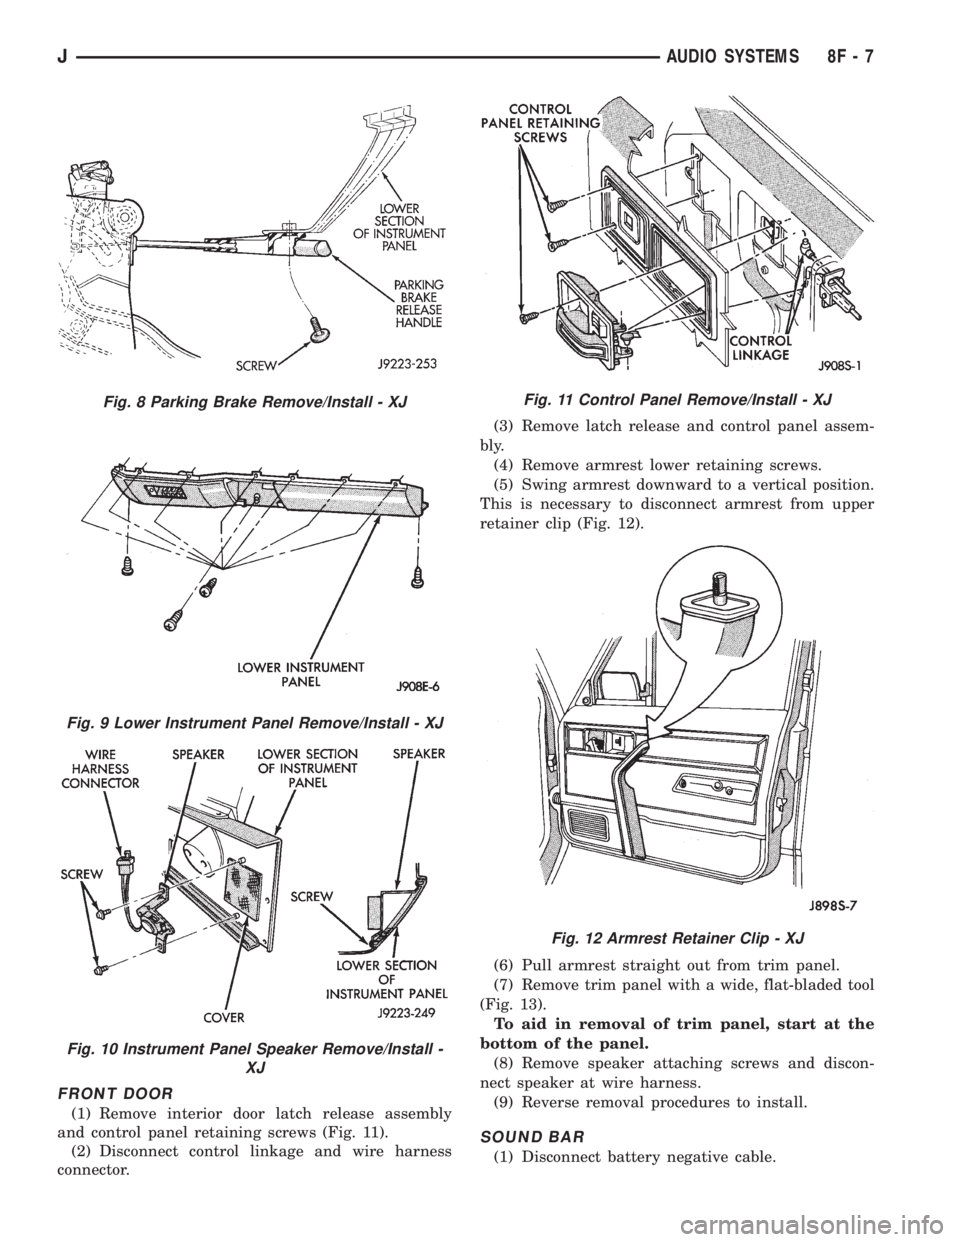 JEEP XJ 1995  Service And Repair Manual FRONT DOOR
(1) Remove interior door latch release assembly
and control panel retaining screws (Fig. 11).
(2) Disconnect control linkage and wire harness
connector.(3) Remove latch release and control 